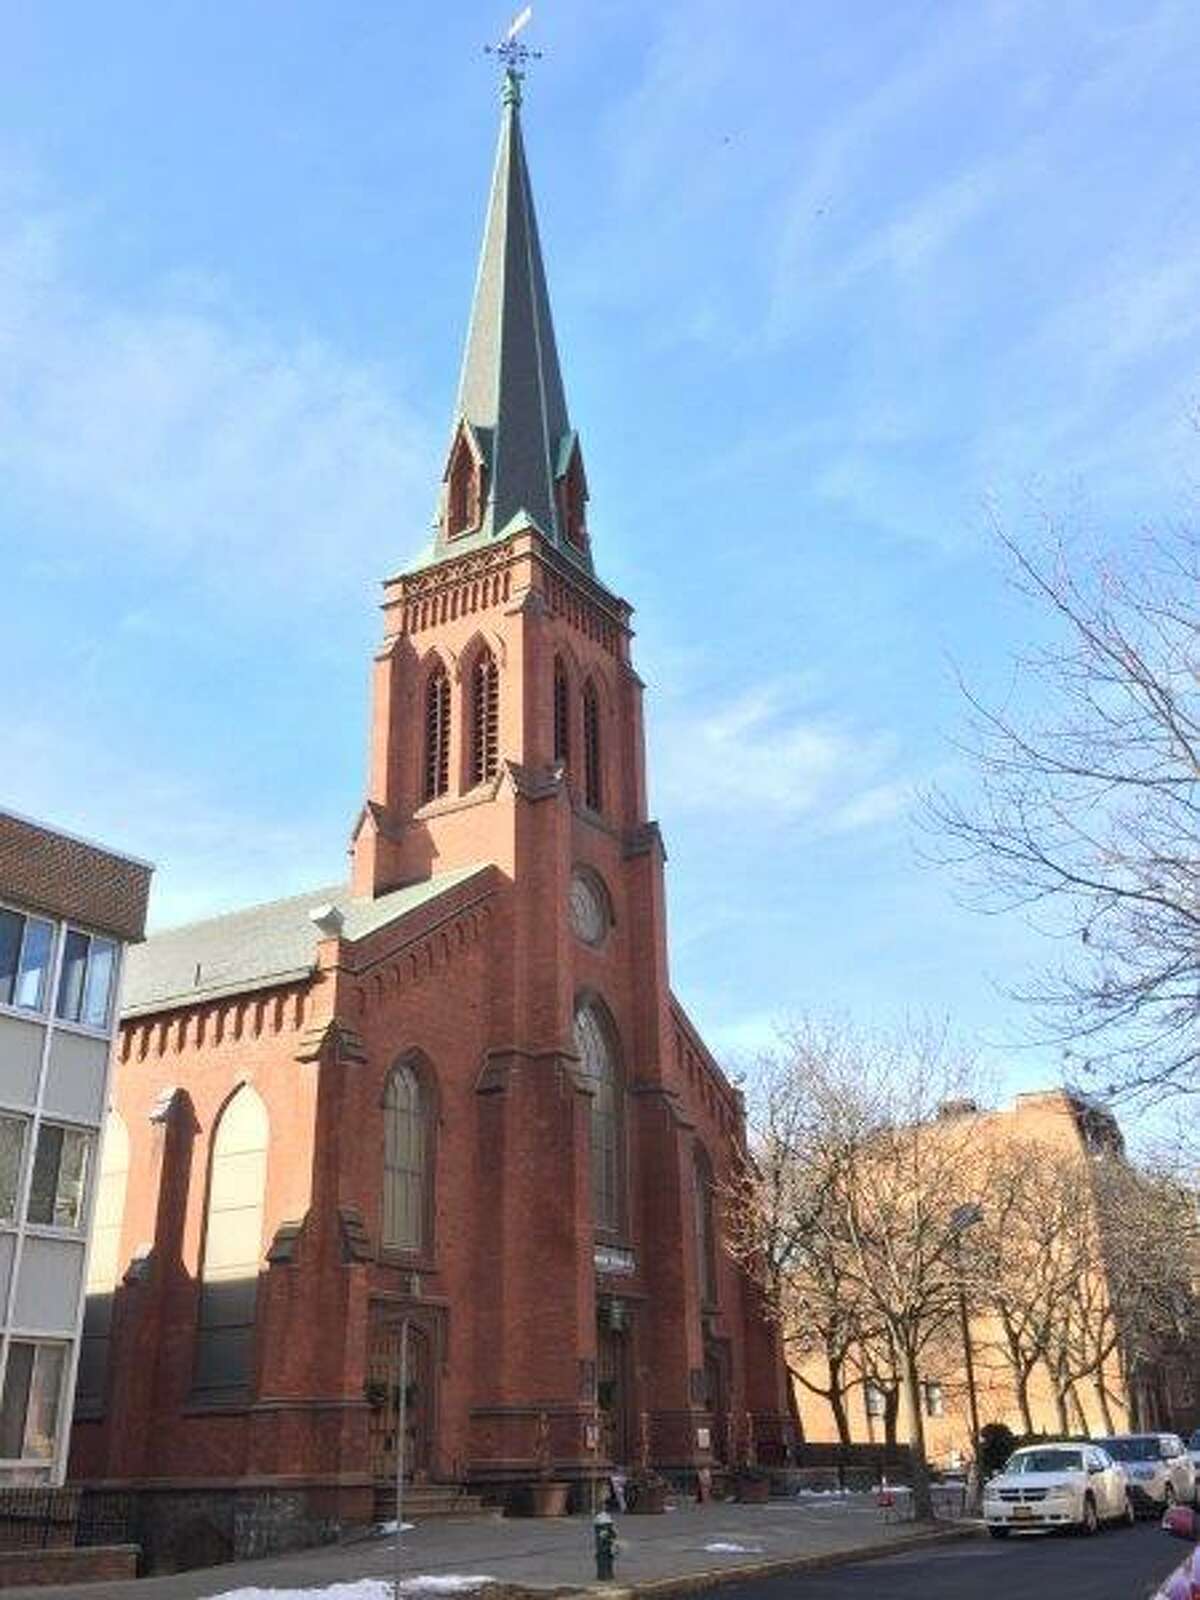 Westminster Presbyterian Church's noteworthy architecture landed it on Albany's Sacred Sites tour before the pandemic. Now, the historic church is installing a new female pastor.